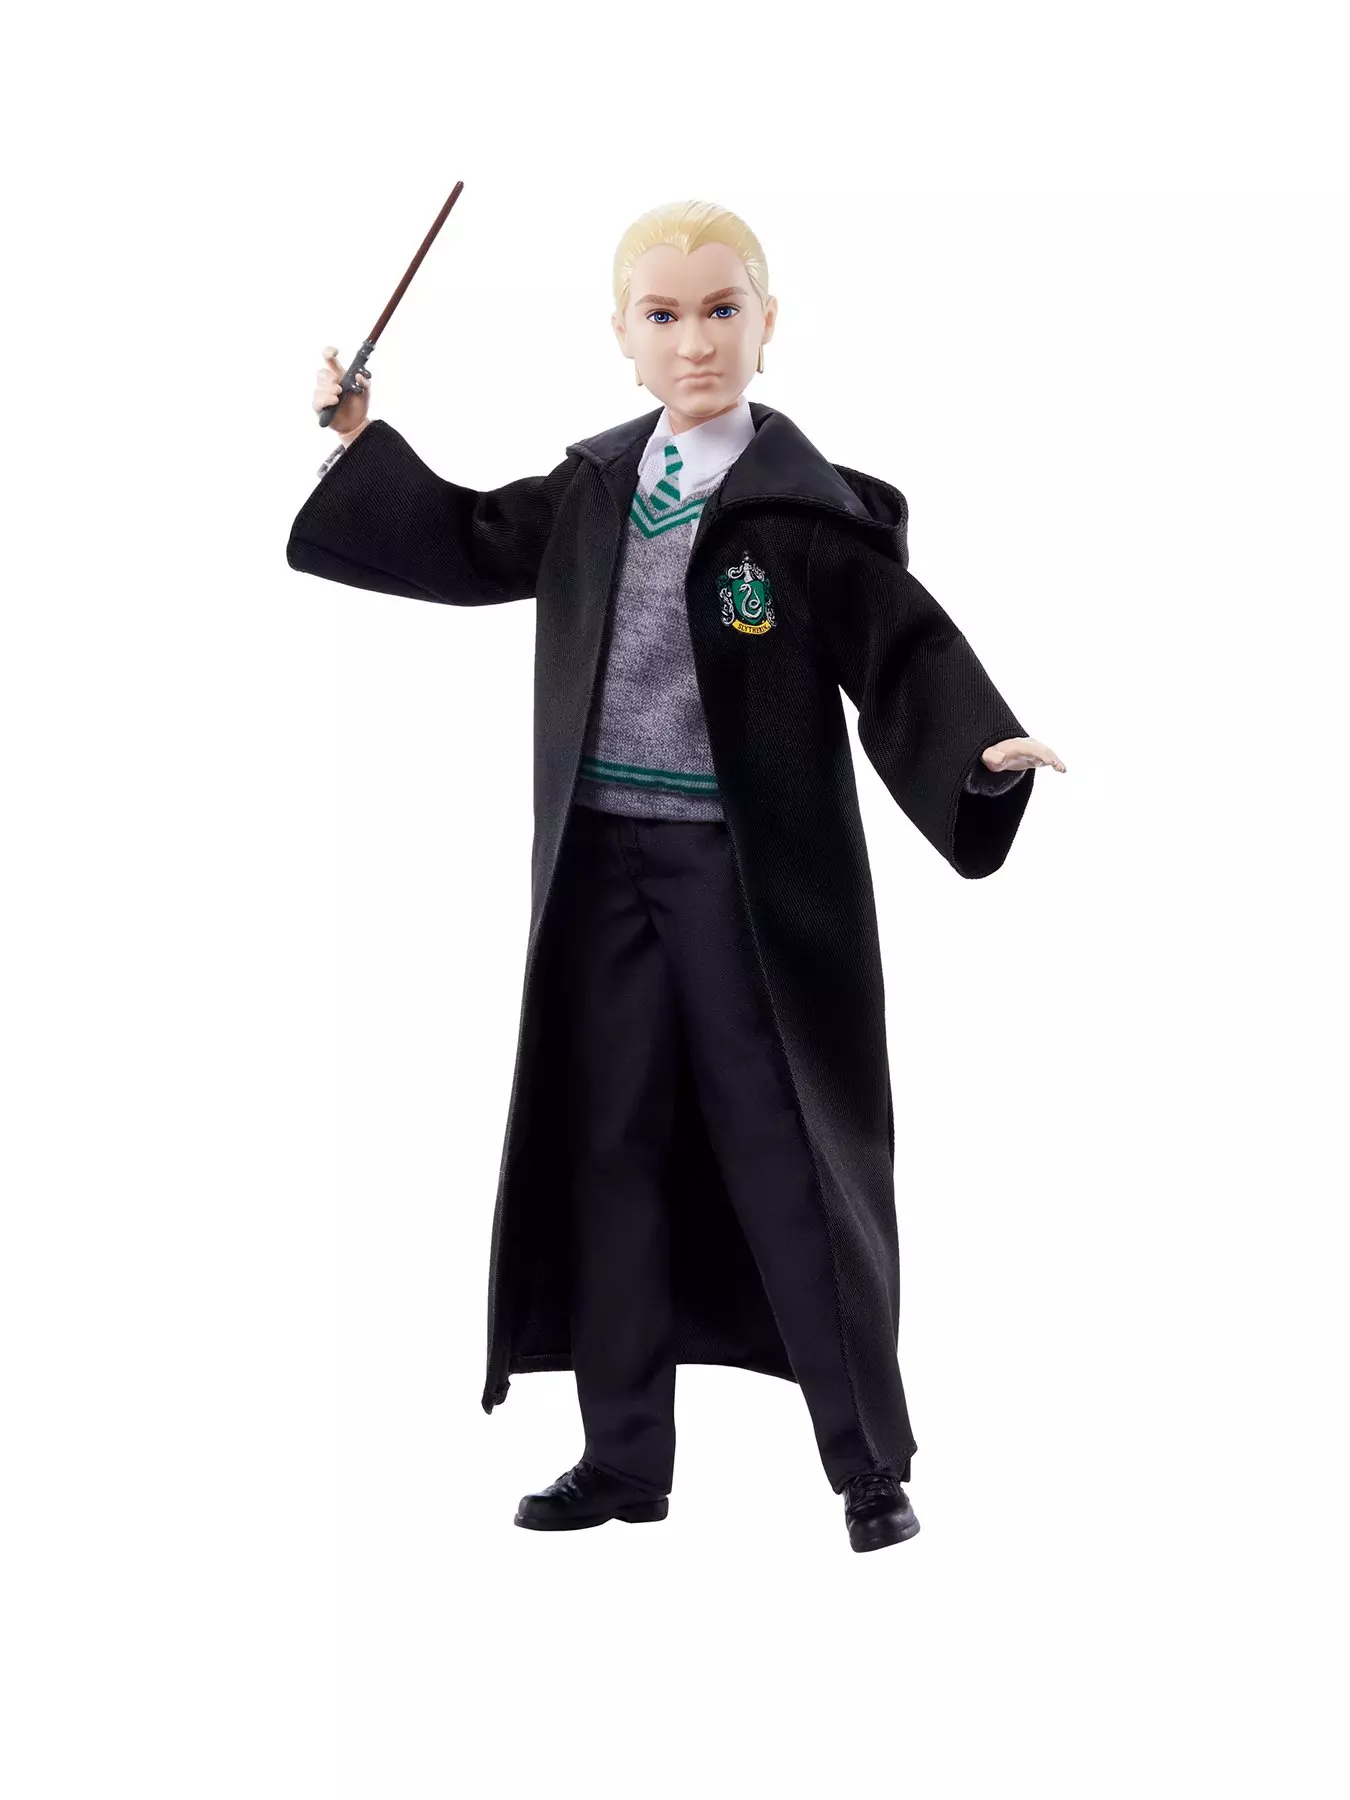 Buy Harry Potter Costume Combo, Official Wizarding World Harry Potter  Hooded Robe, Glasses and Wand for Kids, Size Small (4-6) Online at Low  Prices in